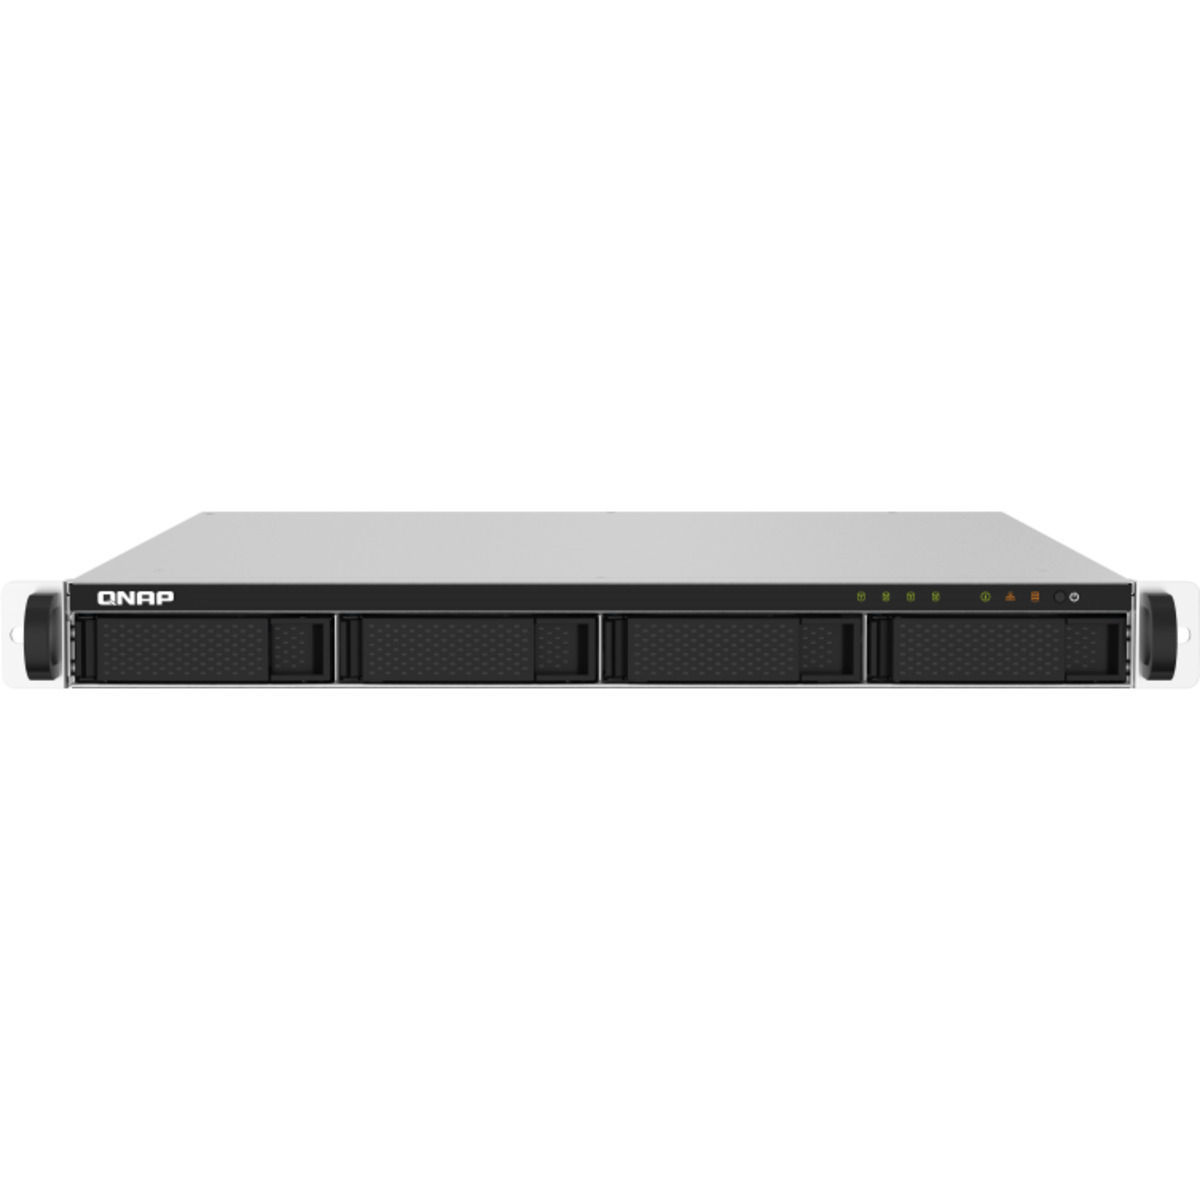 QNAP TS-432PXU-RP 42tb 4-Bay RackMount Personal / Basic Home / Small Office NAS - Network Attached Storage Device 3x14tb Seagate EXOS X18 ST14000NM000J 3.5 7200rpm SATA 6Gb/s HDD ENTERPRISE Class Drives Installed - Burn-In Tested - FREE RAM UPGRADE TS-432PXU-RP